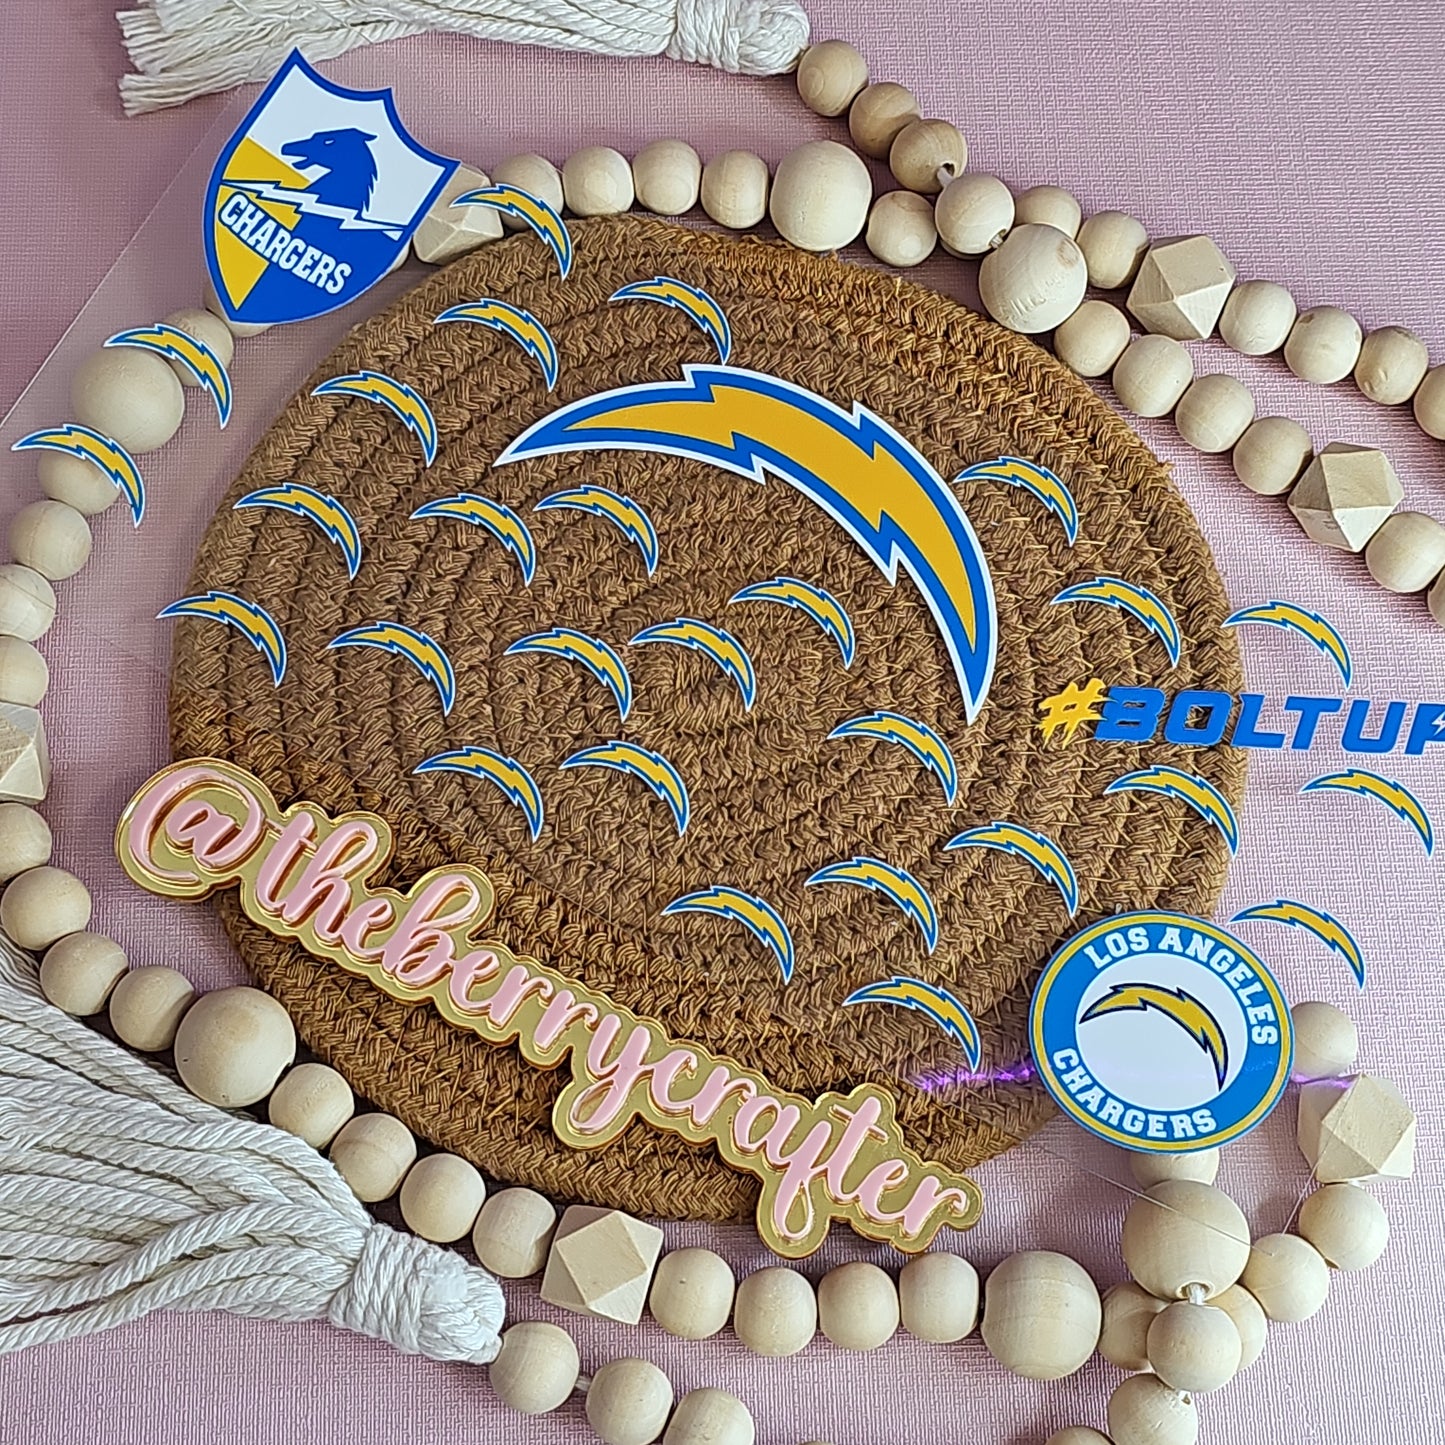 #111 Chargers Boltup UVDTF Wrap